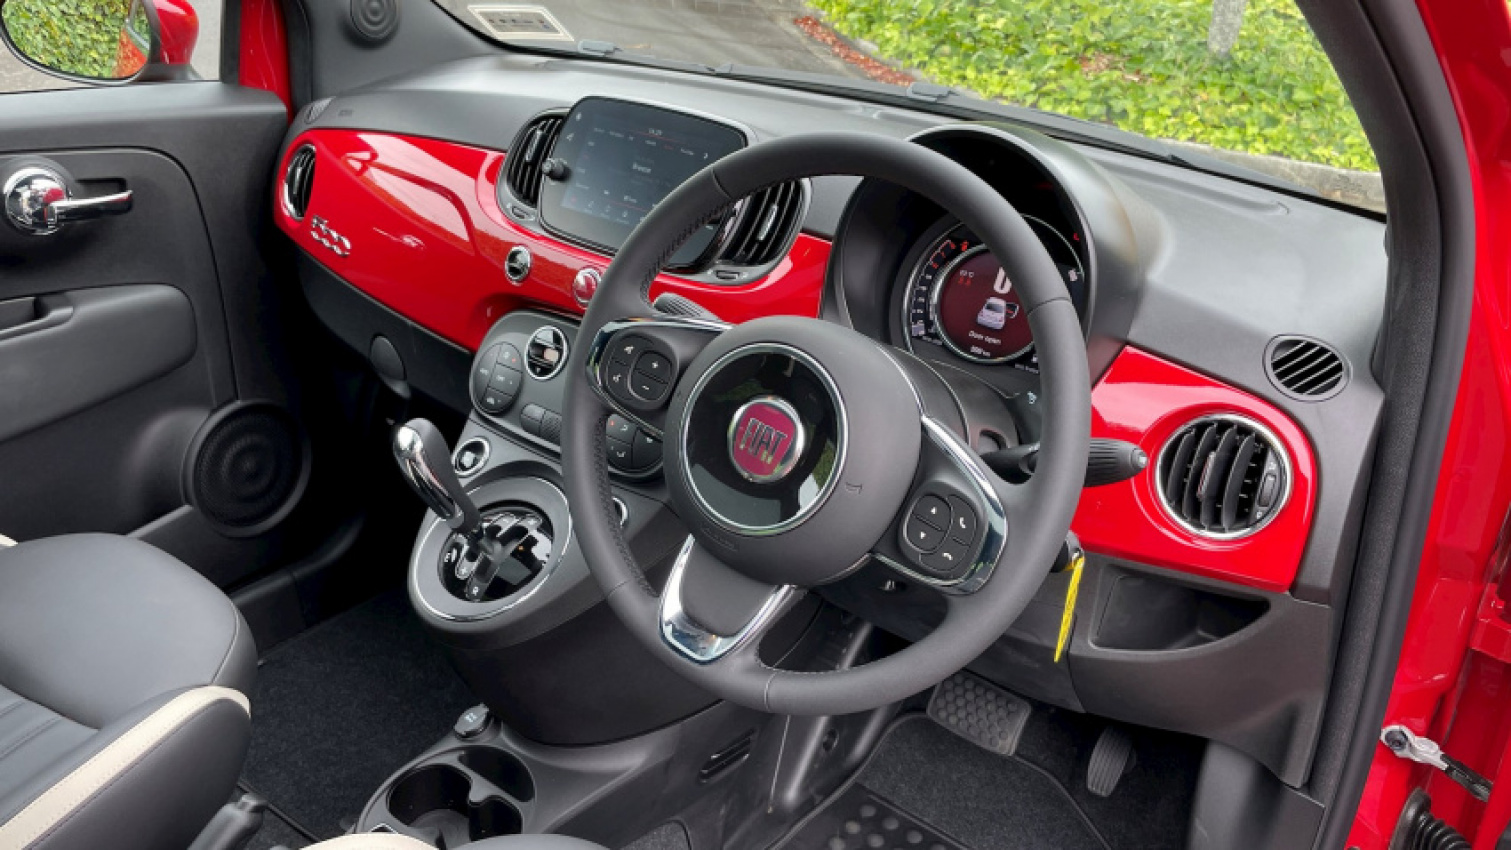 autos, cars, fiat, android, car, cars, driven, driven nz, livin&039; la dolcevita: fiat&039;s refreshed 500 tested, new zealand, news, nz, reviews, android, livin' la dolcevita: fiat's refreshed 500 tested